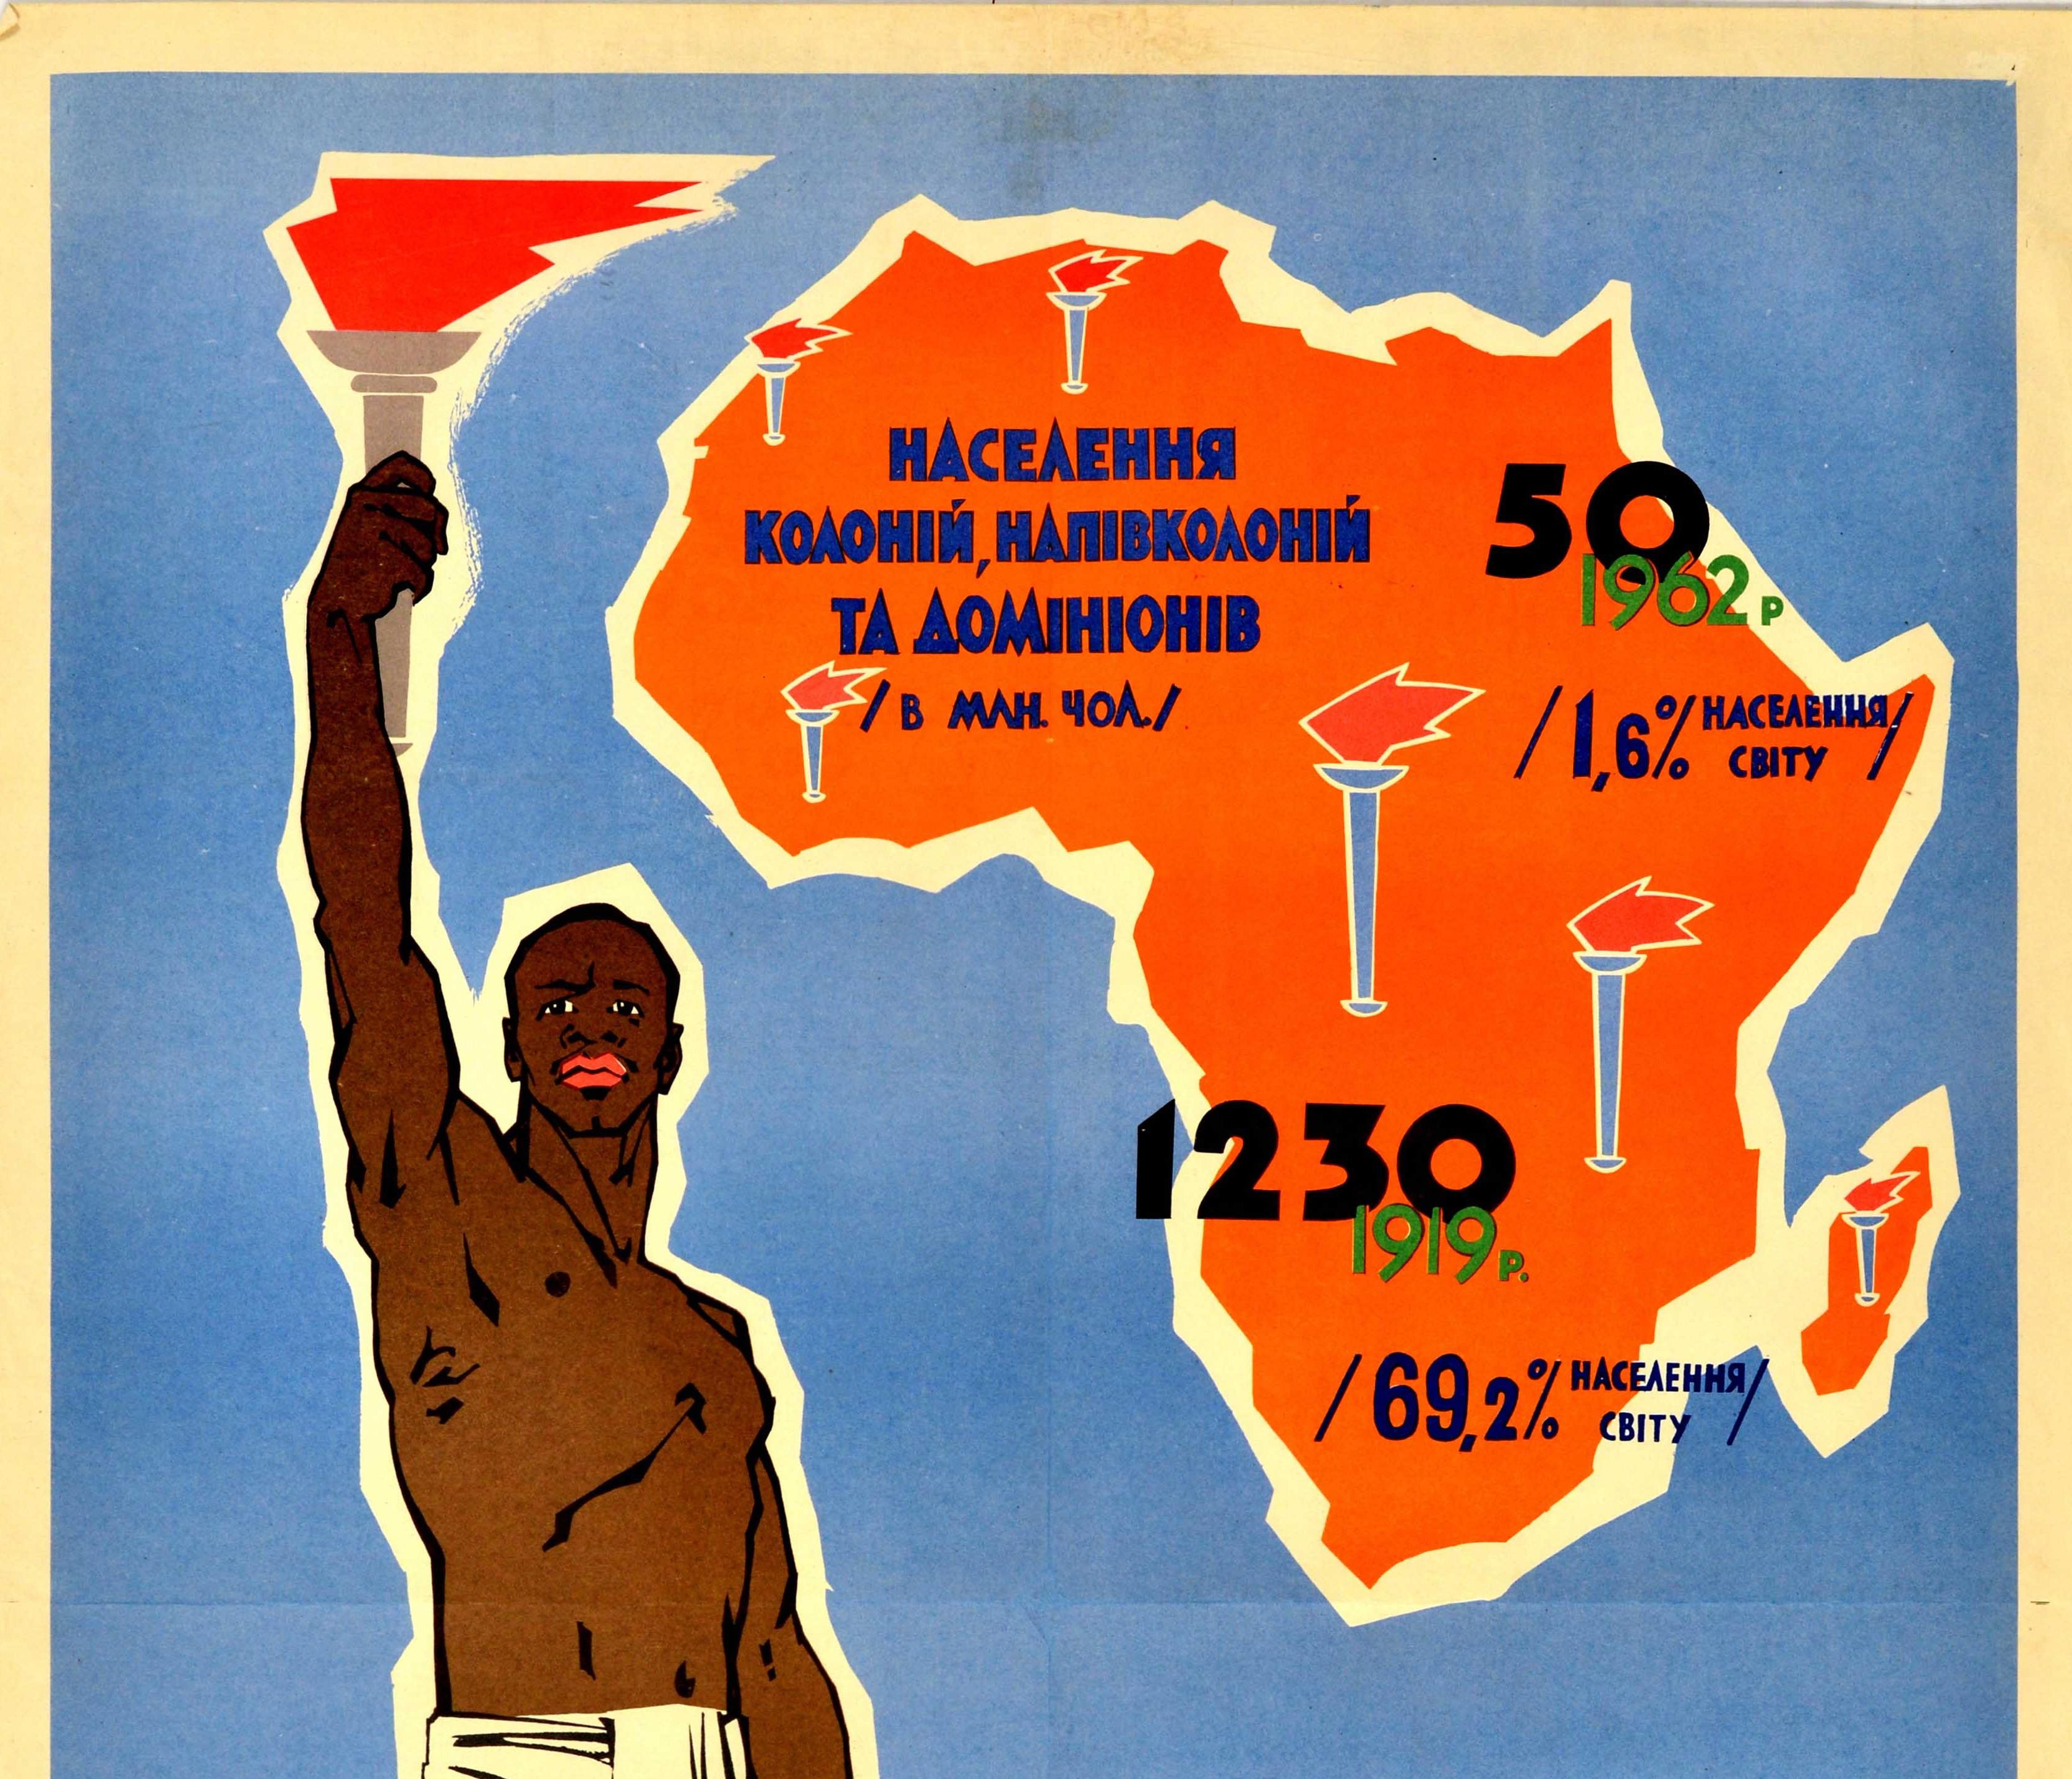 Original vintage Soviet Ukrainian propaganda poster - The Last Hour of Colonialism Is Coming - featuring dynamic artwork depicting a man holding up a flaming torch with information on a map of Africa in orange on the side against the blue